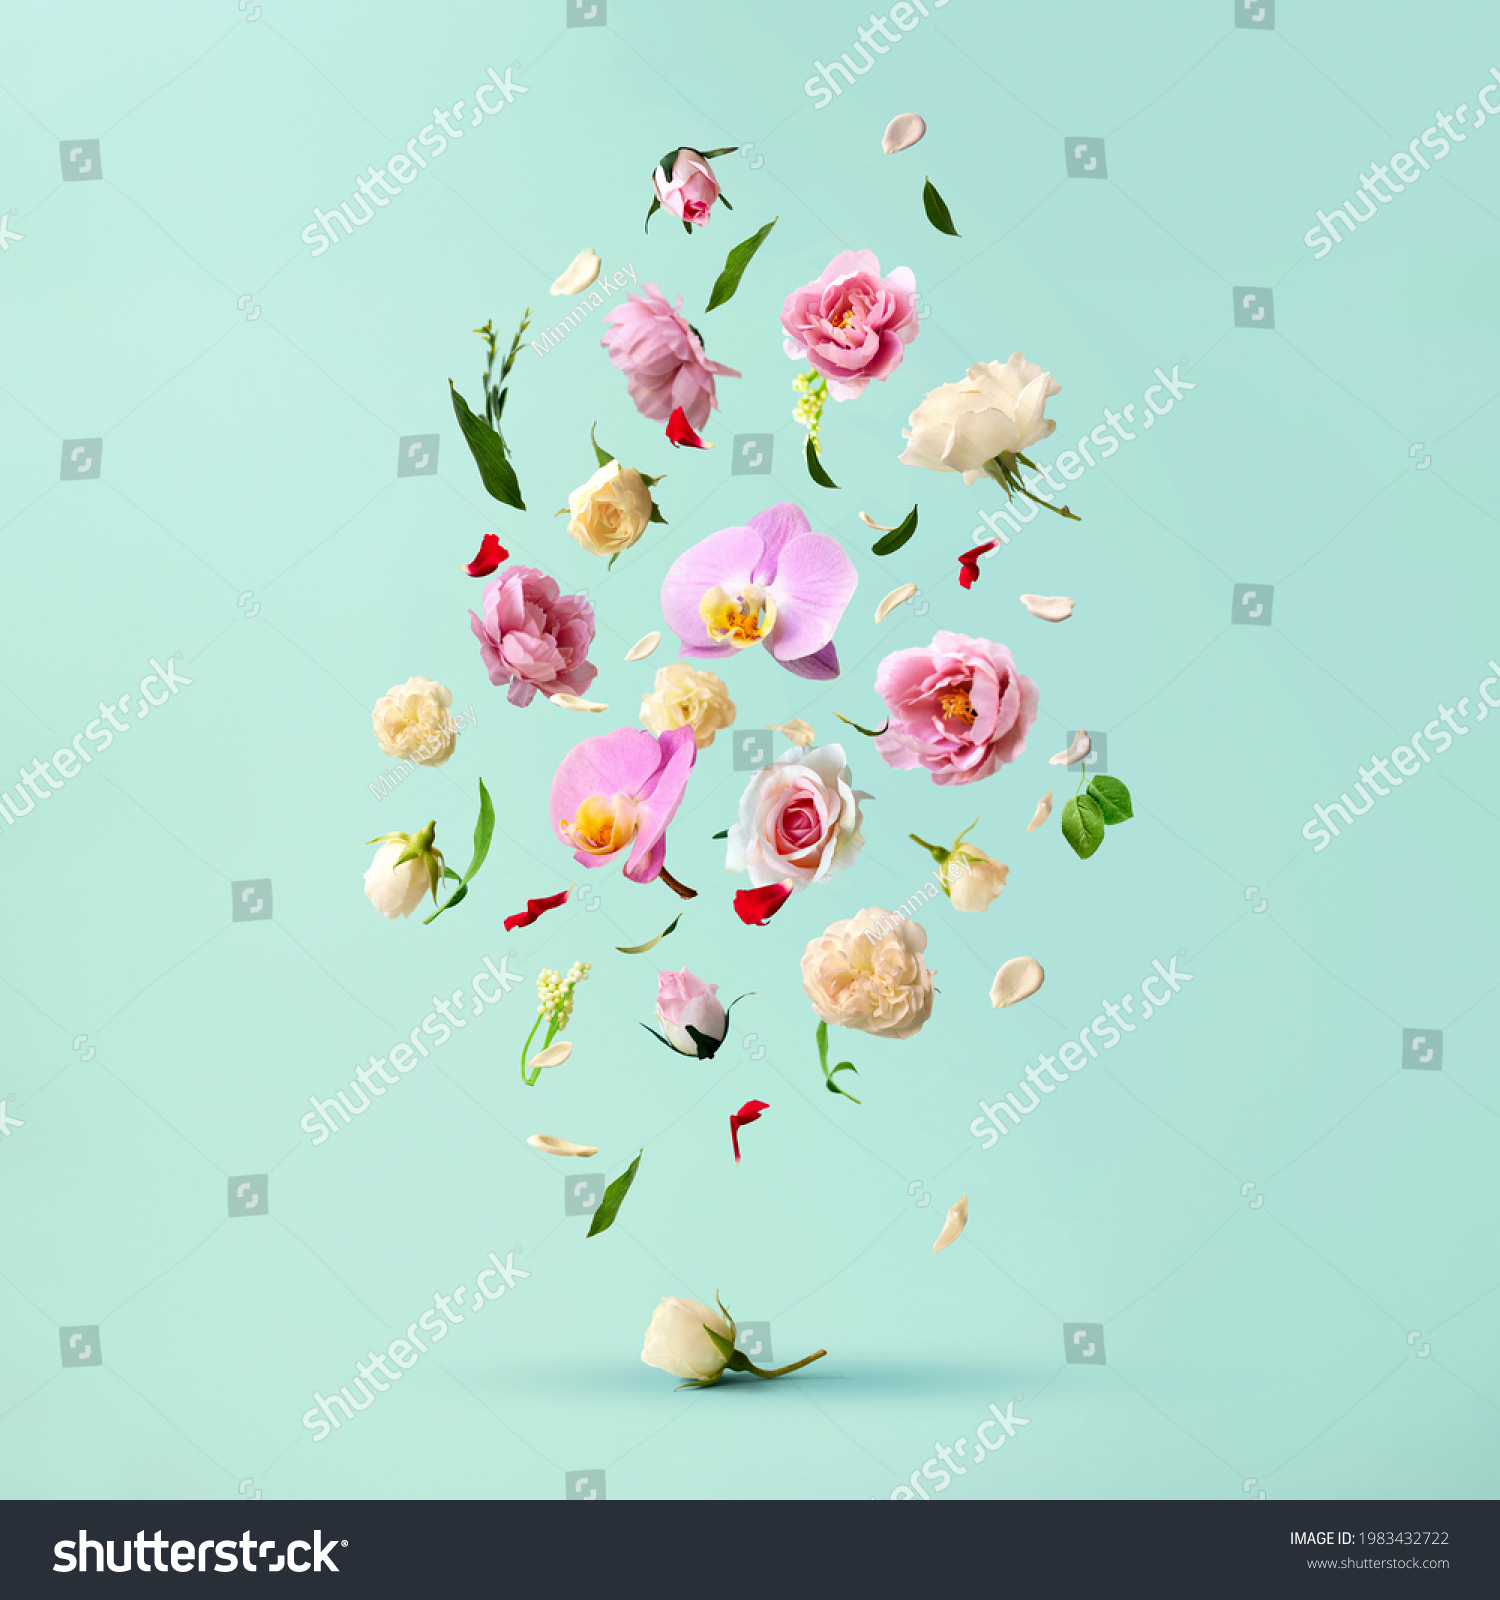 Beautiful spring flowers flying in the air, against teal background; Creative spring floral layout. Minimal birthday, valentines or wedding concept. #1983432722